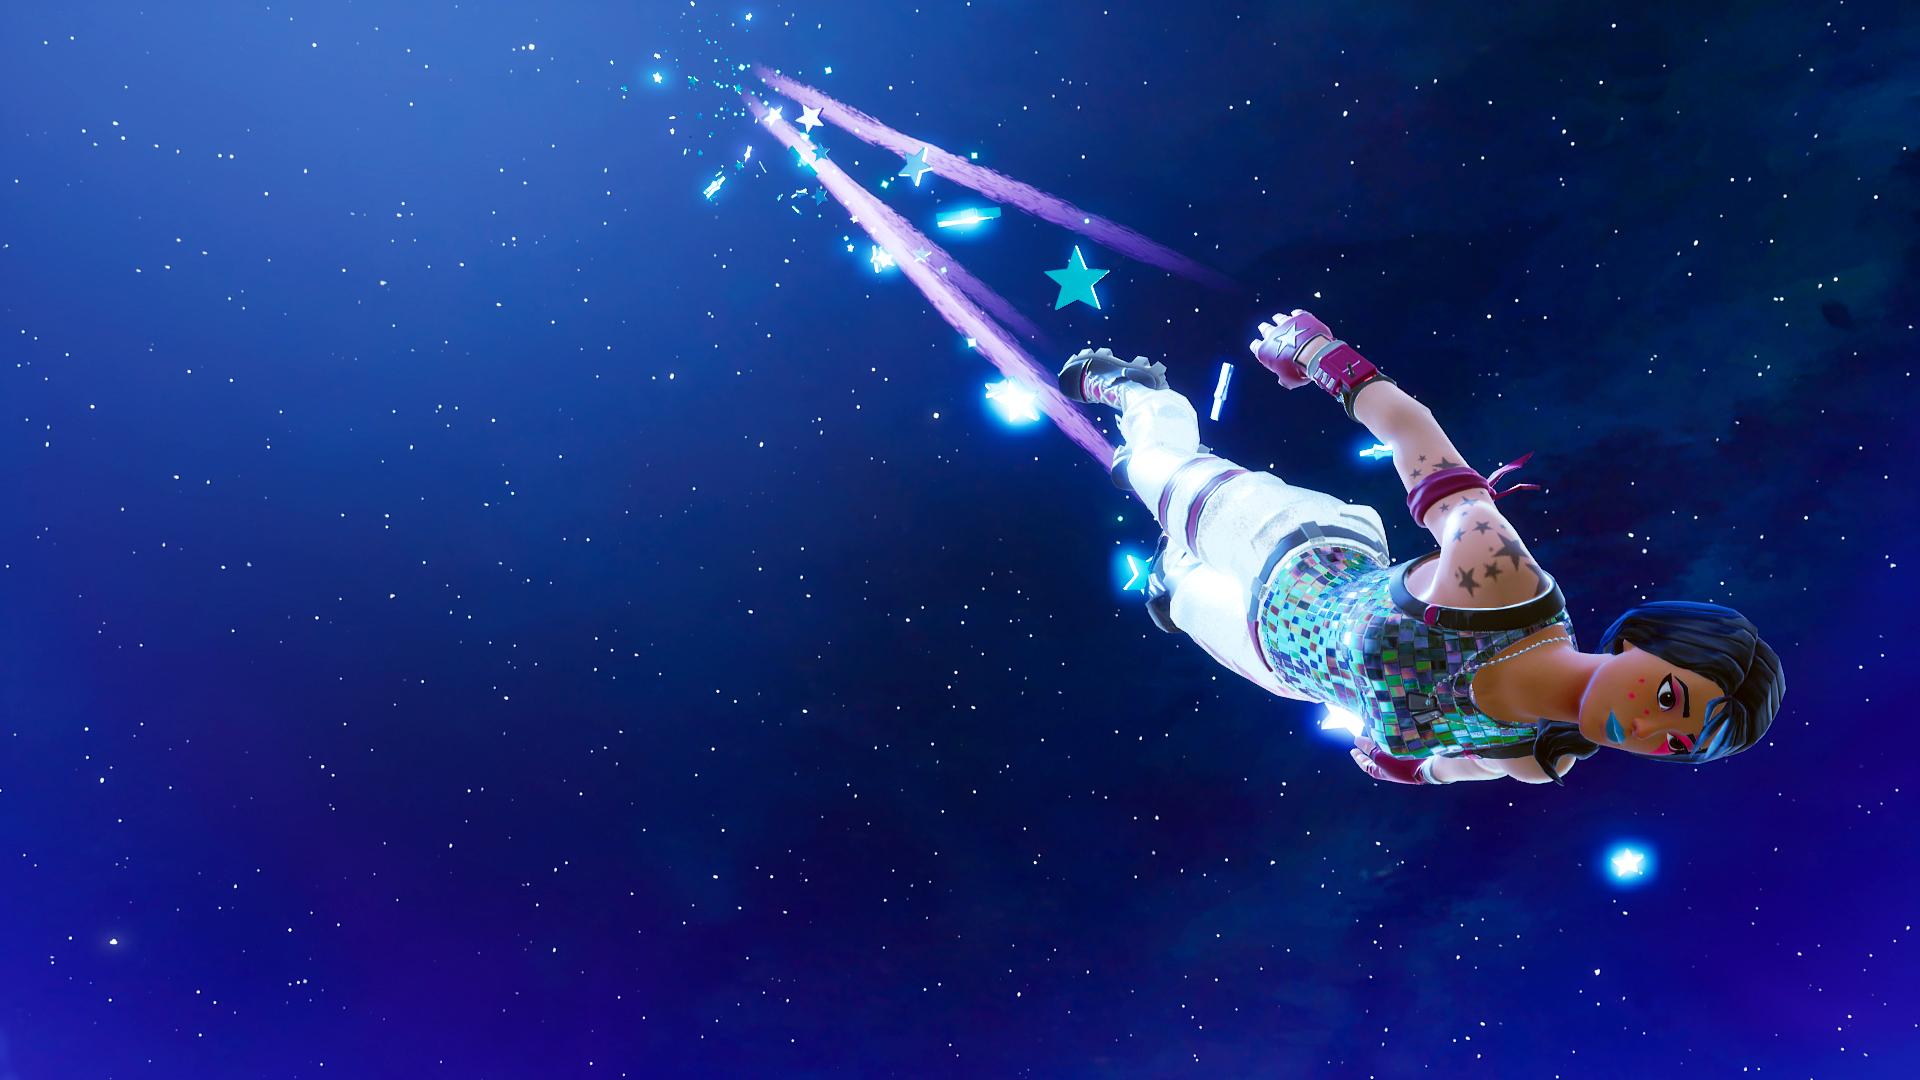 Sparkle Specialist Fortnitephotography